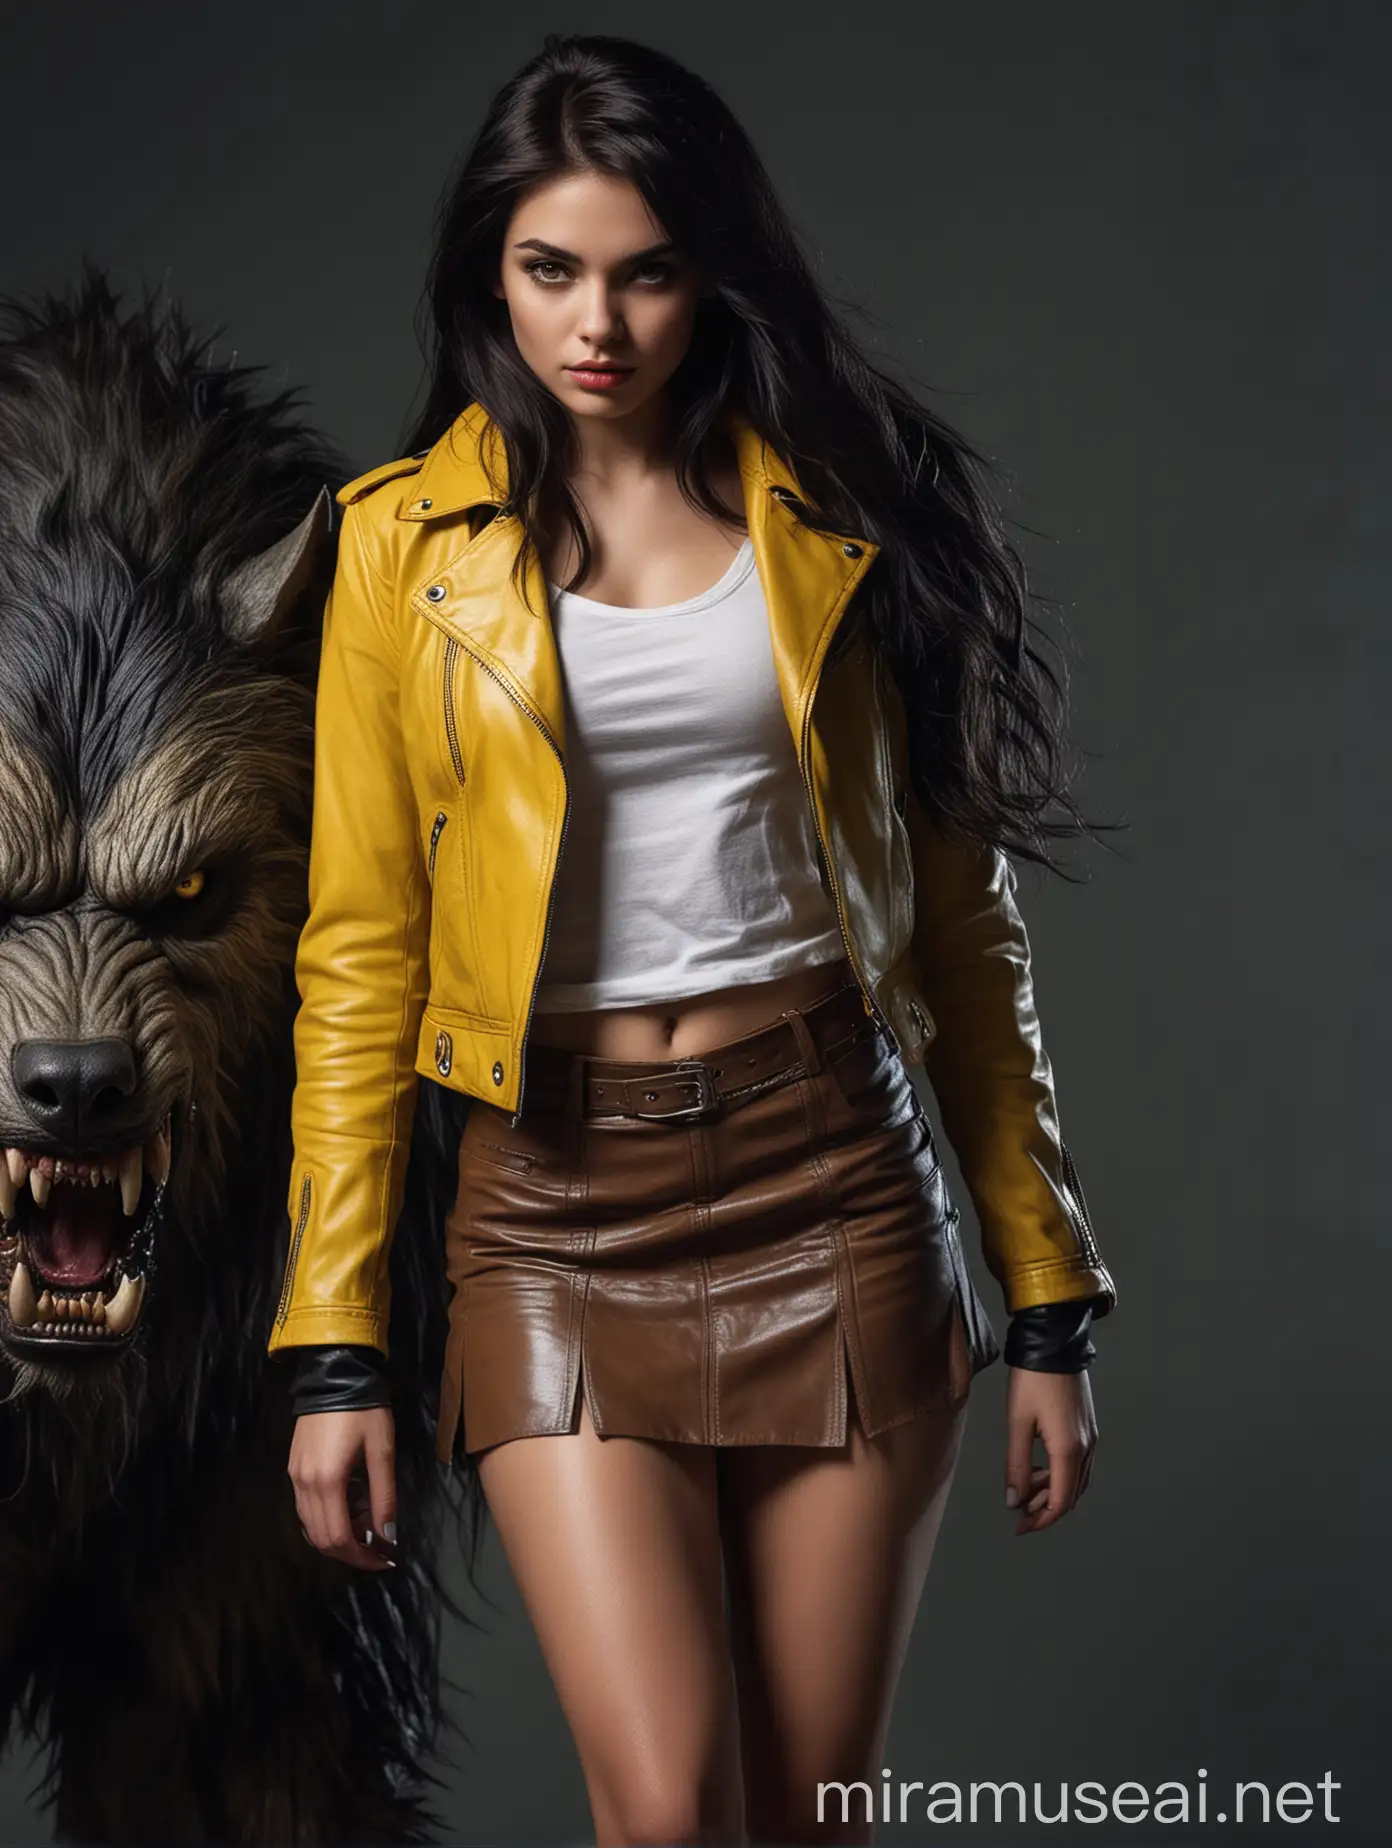 Captivating DarkHaired Girl in Yellow Leather Jacket Confronts Majestic Werewolf